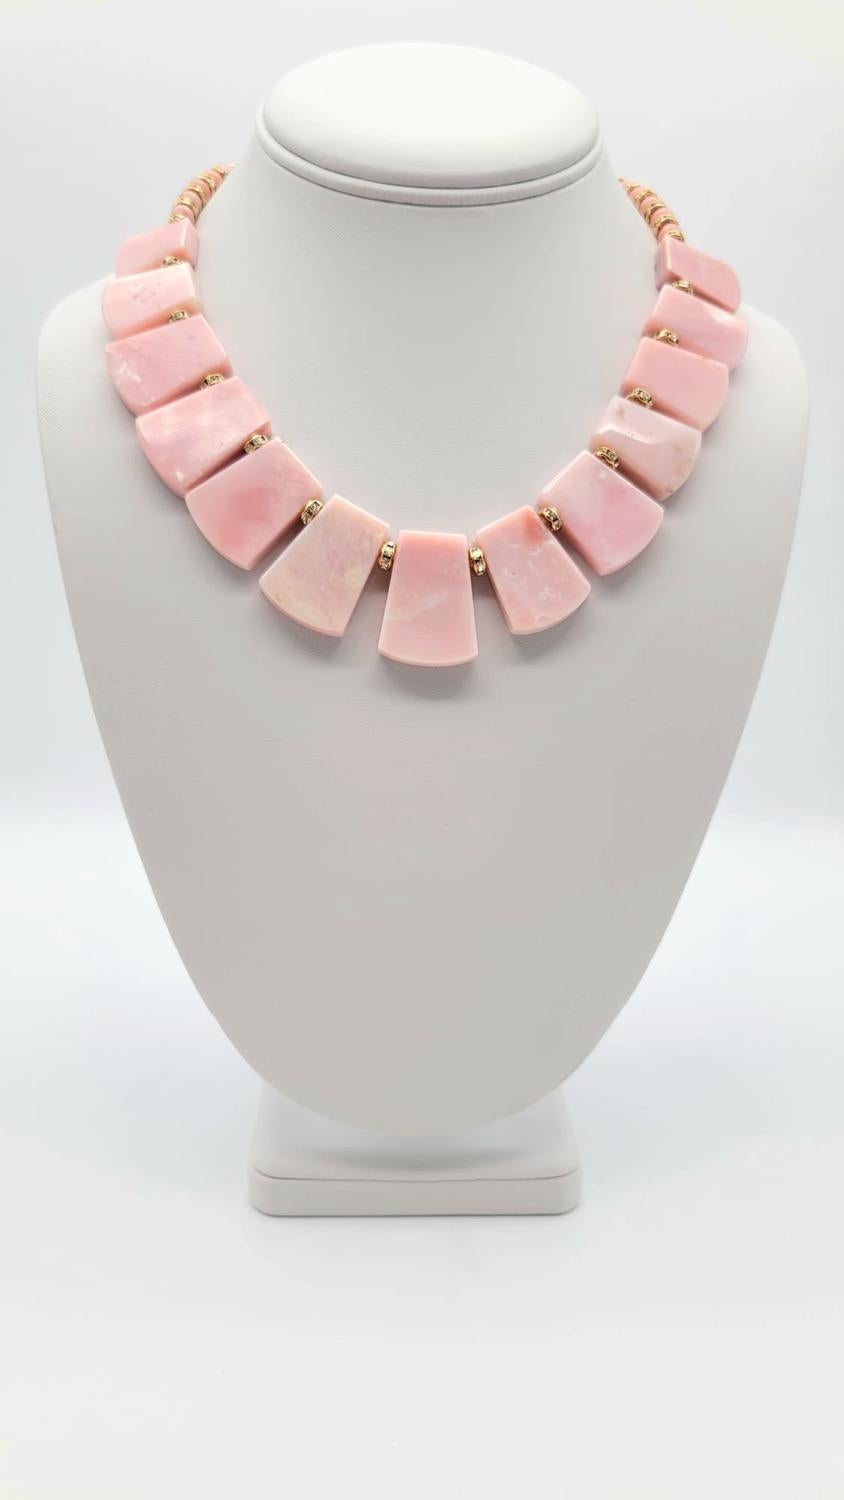 This one-of-a-kind necklace is a true delight for lovers of pink hues and opal gemstones. These stunning opals exhibit a range of hues, from soft blush to deep rose, creating a mesmerizing visual effect that is both elegant and modern.

The opal